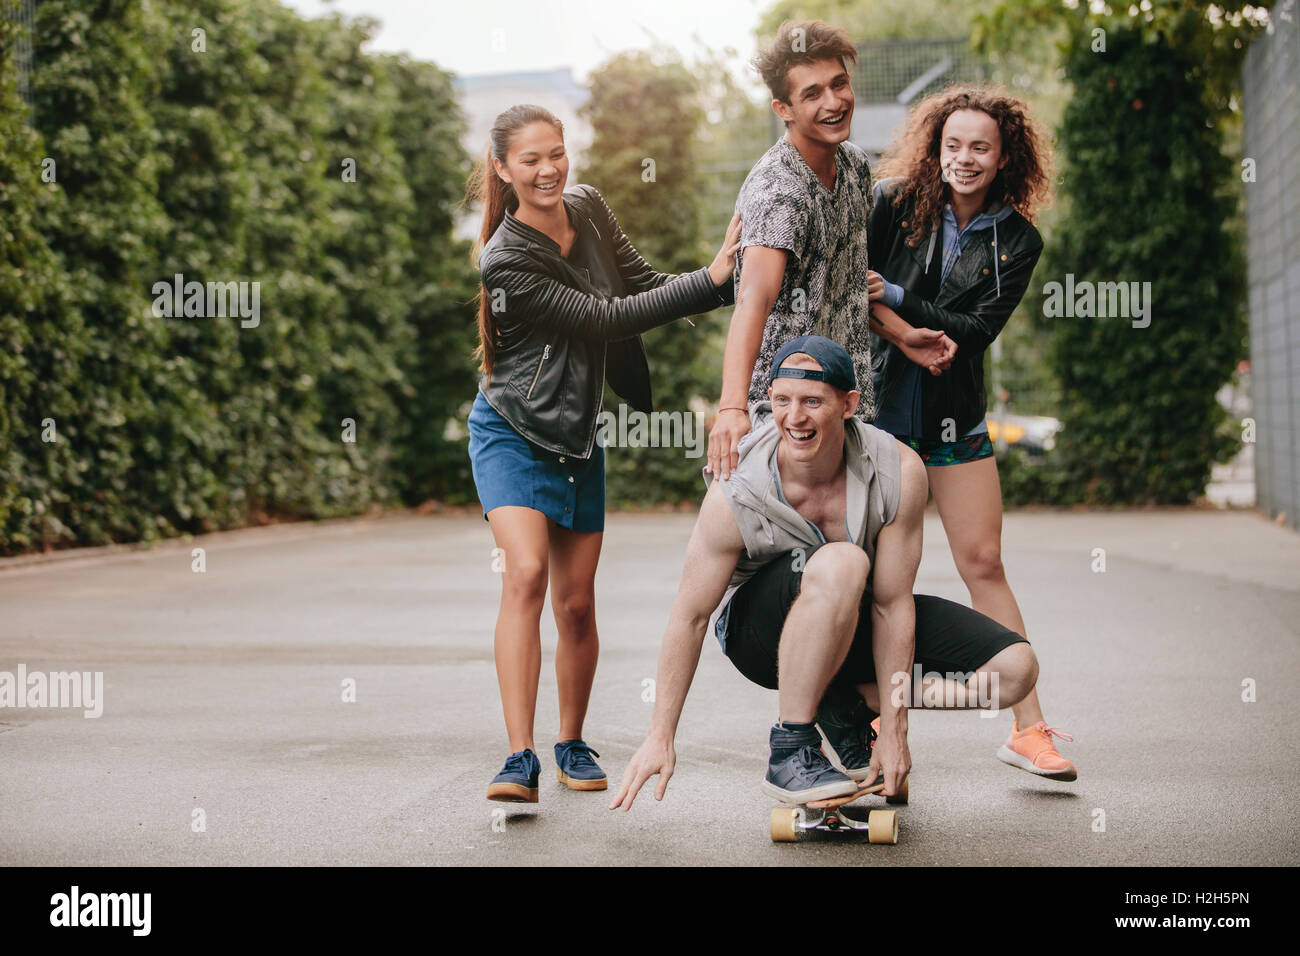 Full length shot of young men on skateboard with women friends pushing. Four teenagers enjoying outdoors with skateboard. Stock Photo